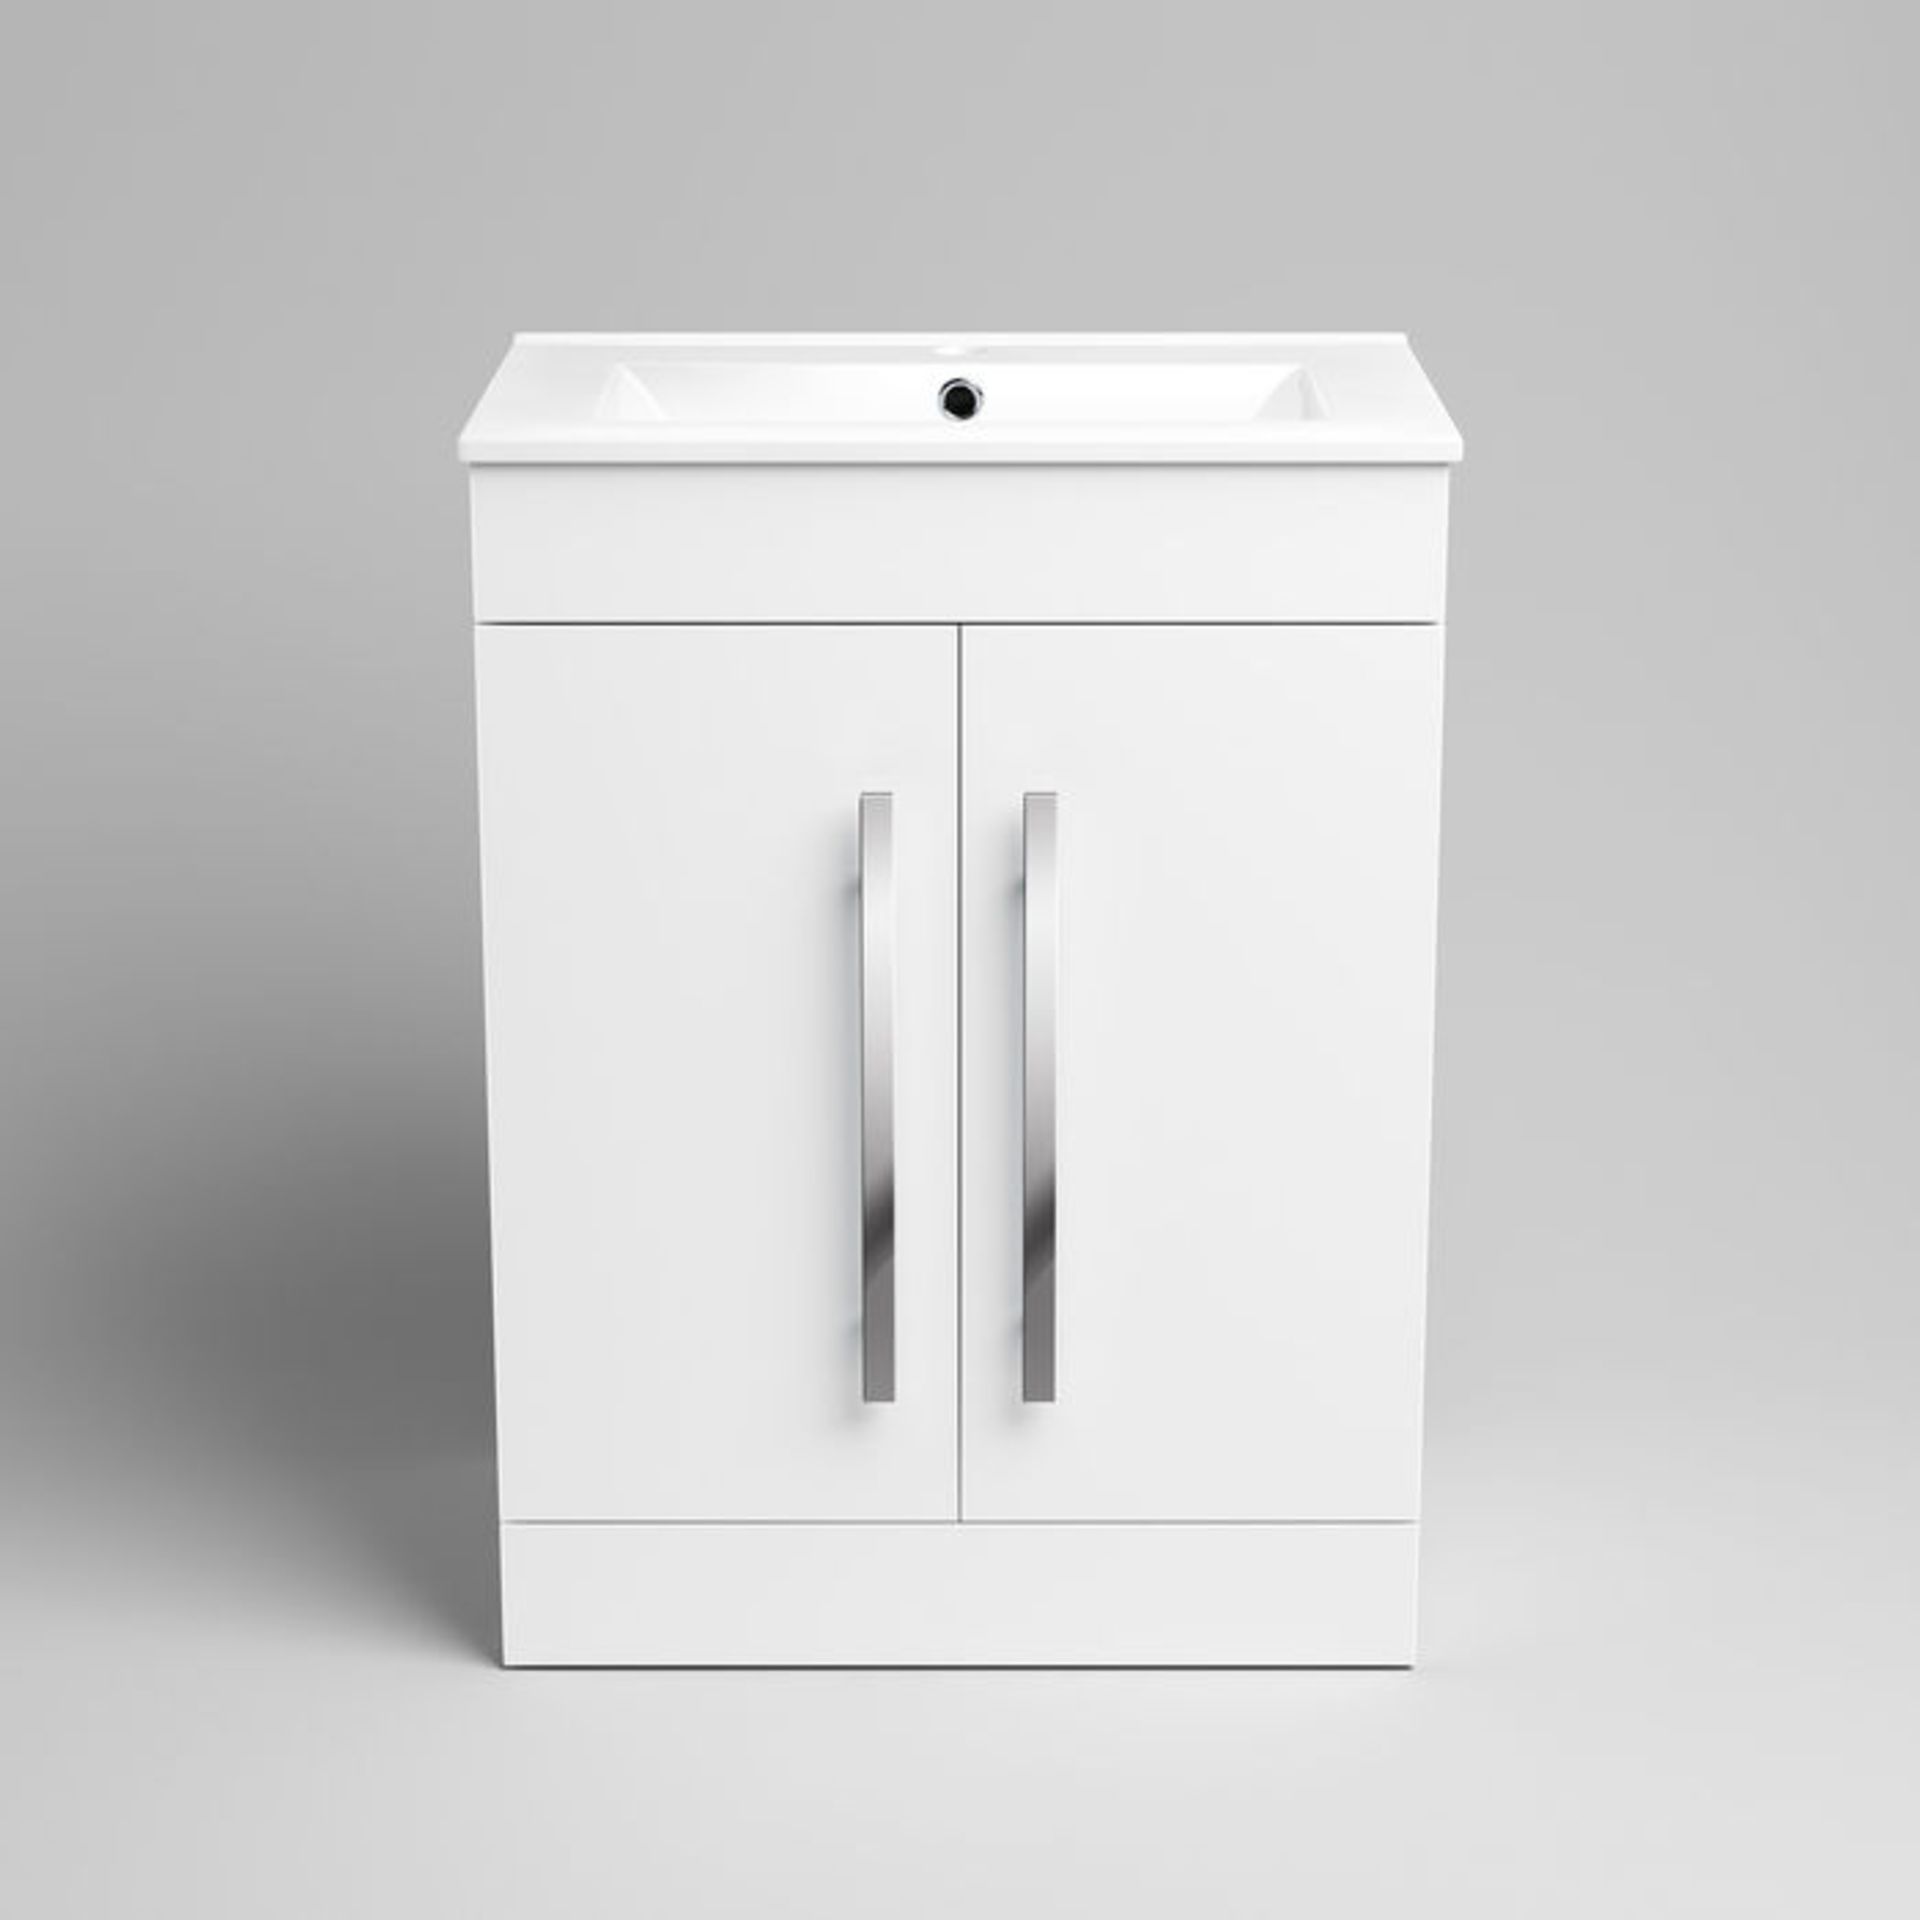 (AH27) 600mm Avon High Gloss White Basin Cabinet - Floor Standing. RRP £499.99. Comes complete - Image 3 of 4